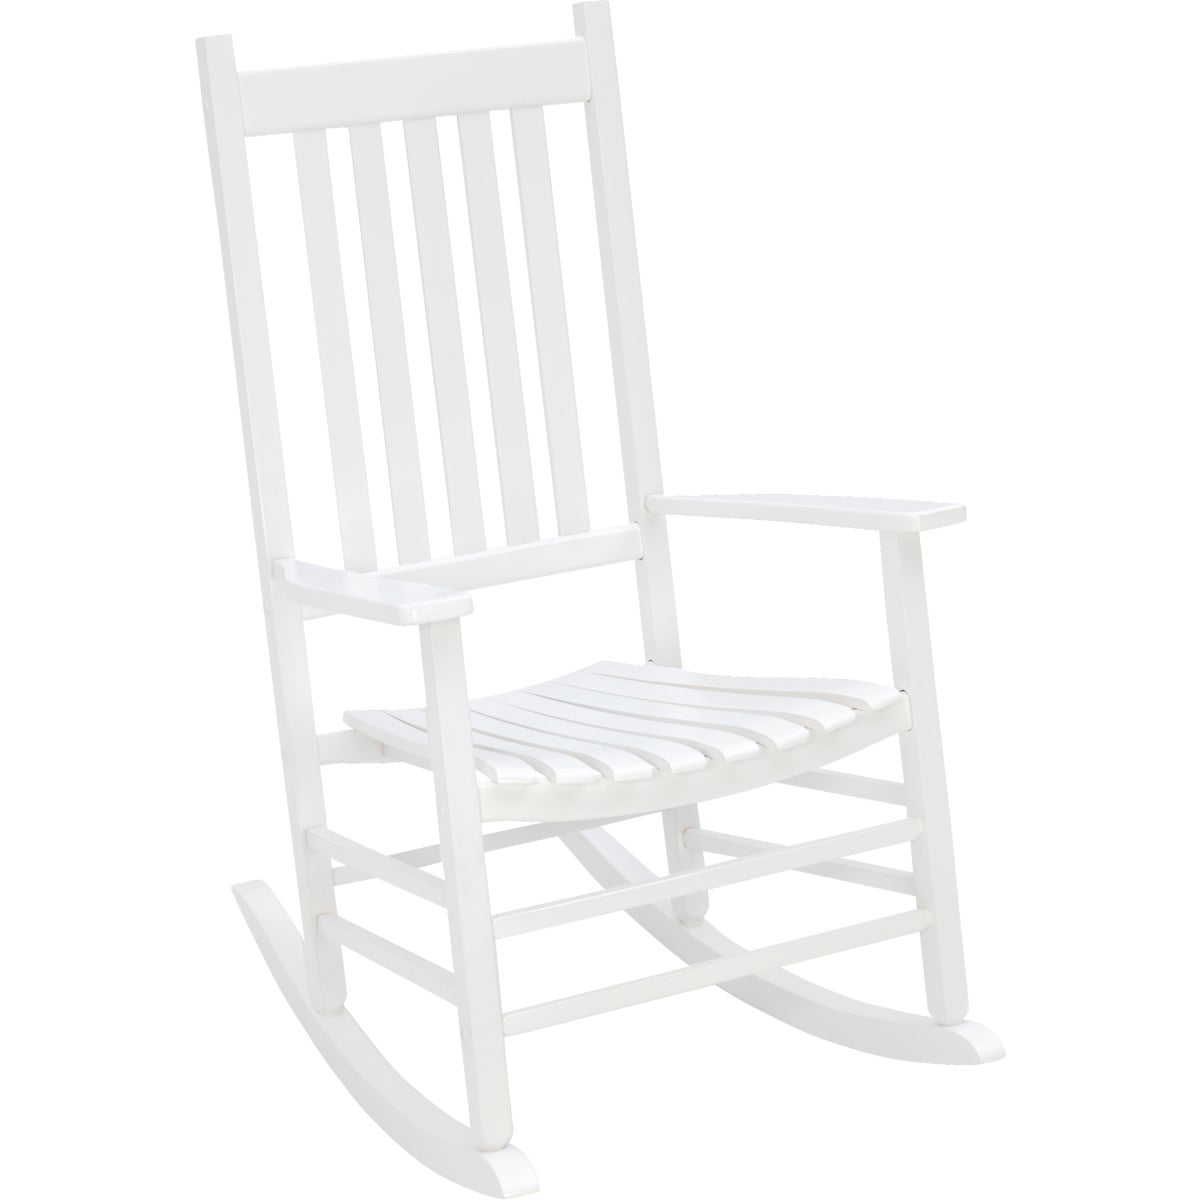 Jackpost White Wood Mission Rocking Chair